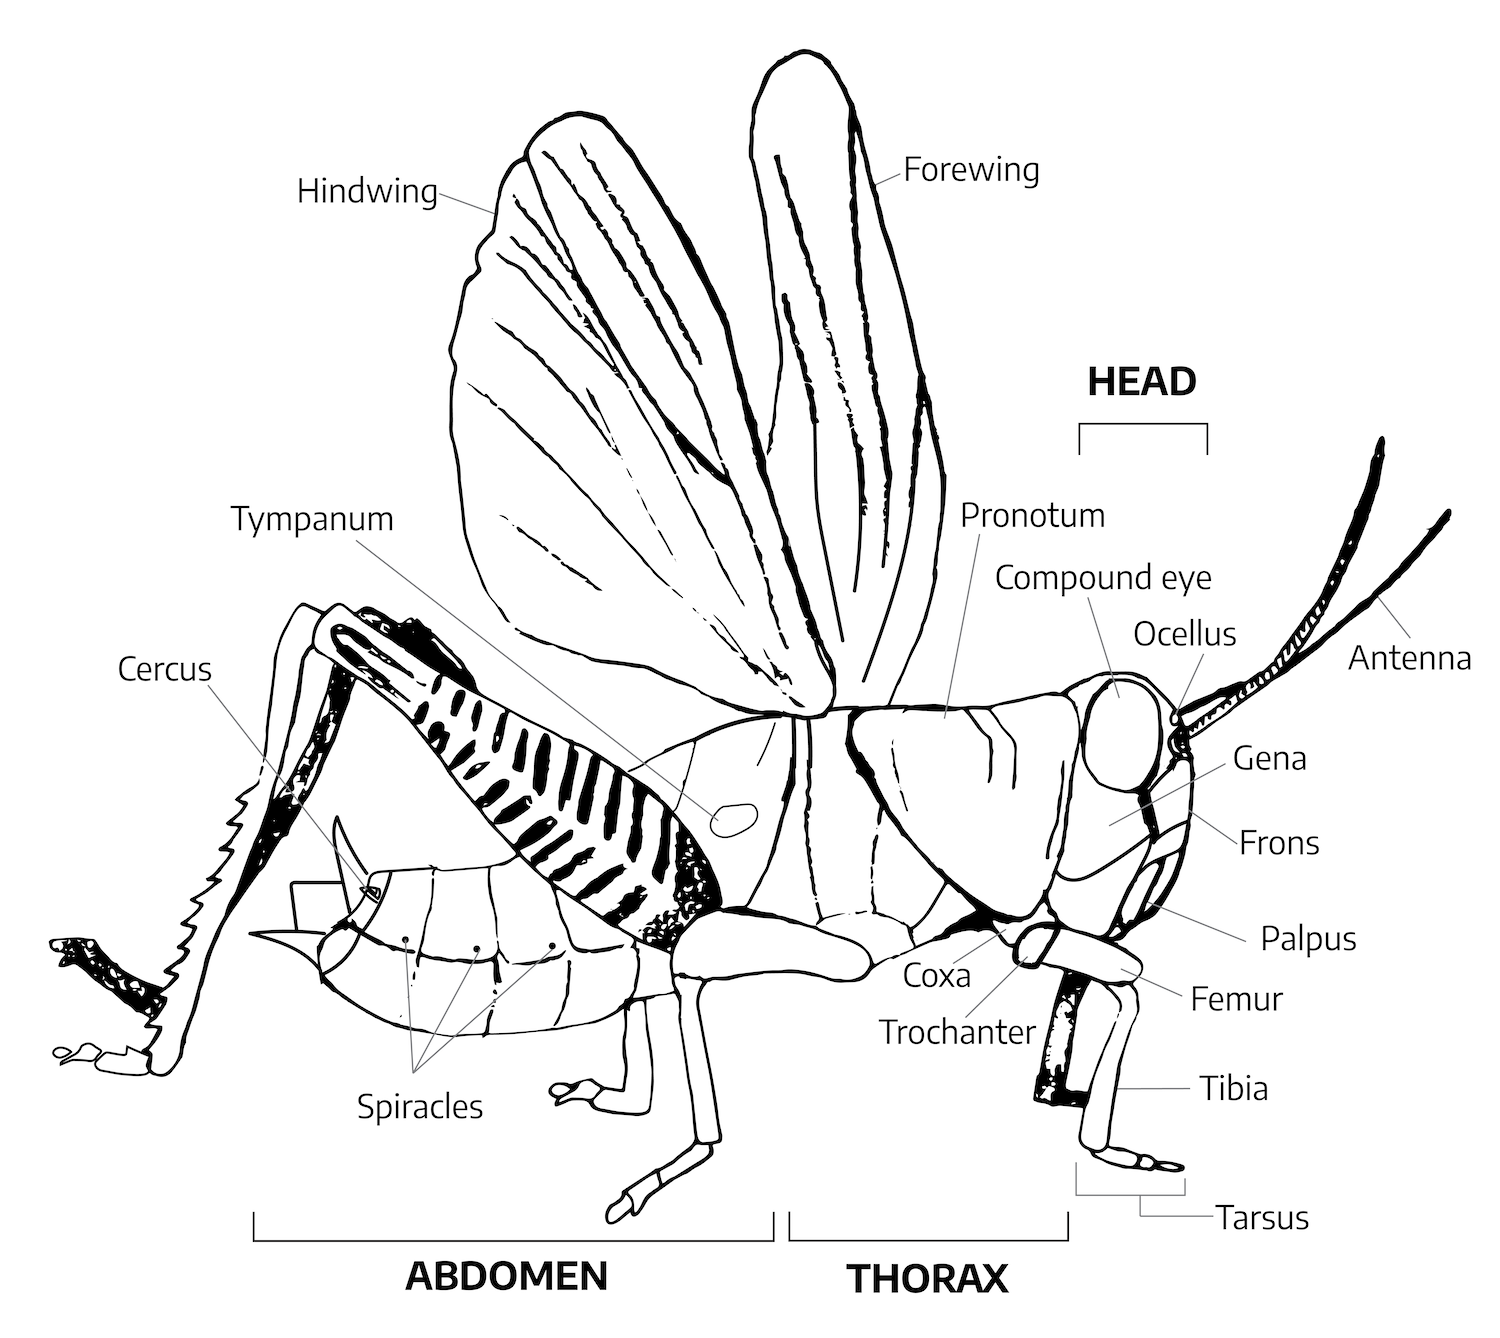 A diagram of an insect (grasshopper), containing two pairs of small legs and one pair of large legs, showing the different parts of its body. Starting at its head is two antenna, two compound eyes, the two head plates, gena and fons, and the mouth, palpus. The thorax contains the protective body covering, pronotum, the coxa and trochanter where the front pair of legs are attached, and the leg itself, femur, tibia, and tarsus. The abdomen contains the forewing and hindwing, the tympanum, the middle part of the protective body, the spiracles, joints on the last part of the protective body, and the circus as the tail; also includes the second pair of small legs and the one pair of large legs.